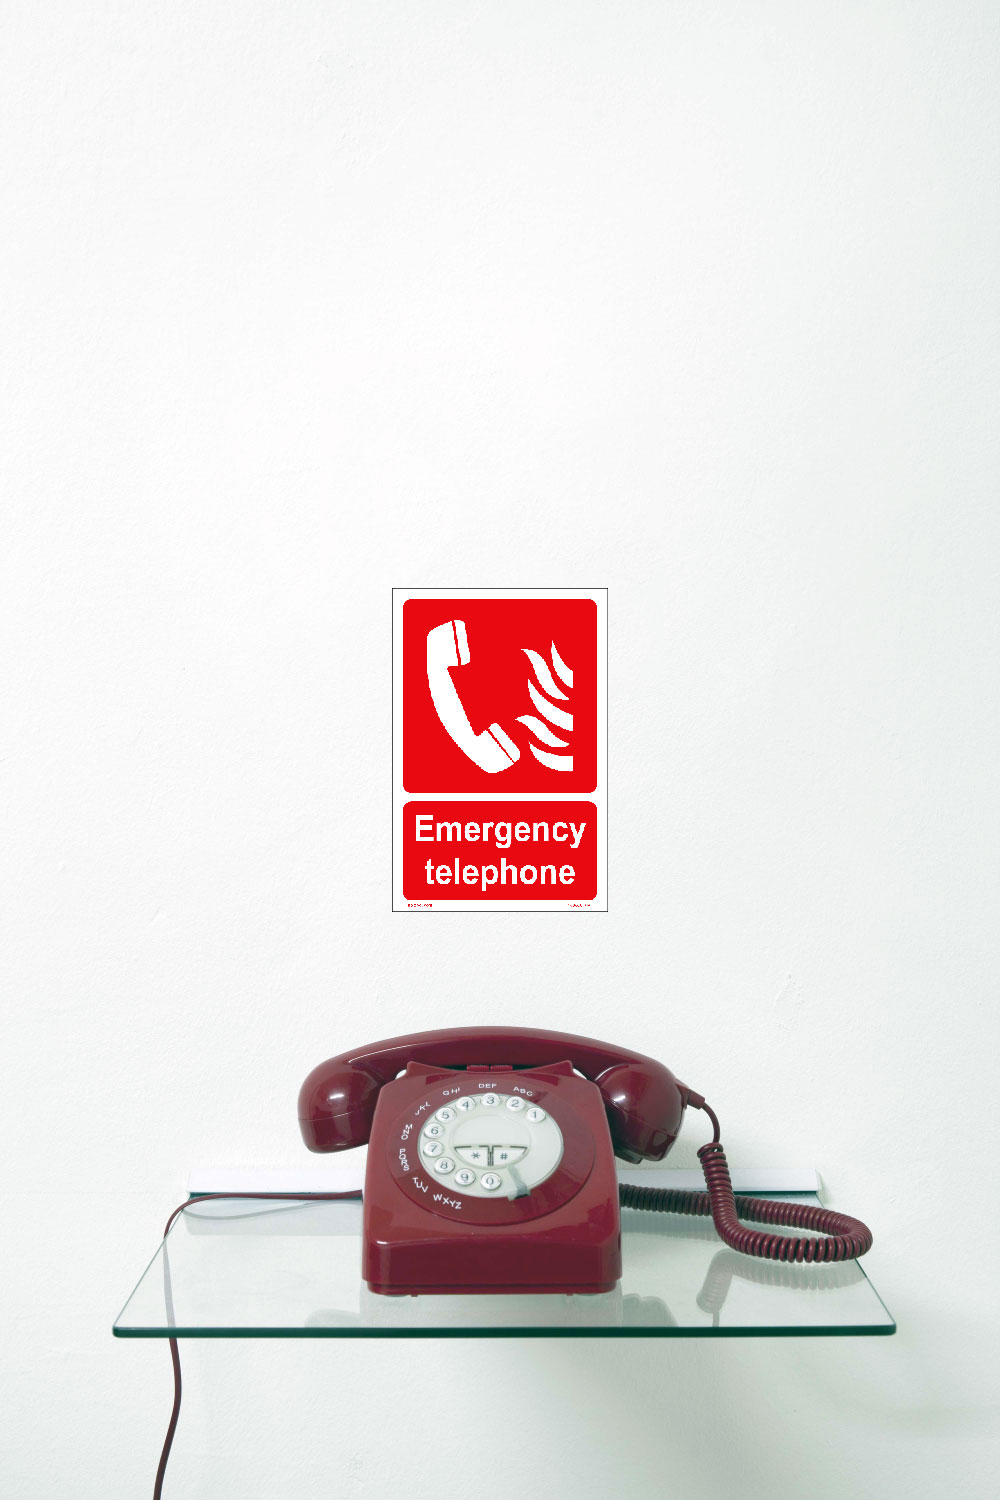 https://www.nplabel.com/images/products_gallery_images/153608B-Emergency-Telephone-Name-Plate-_-Signs.jpg